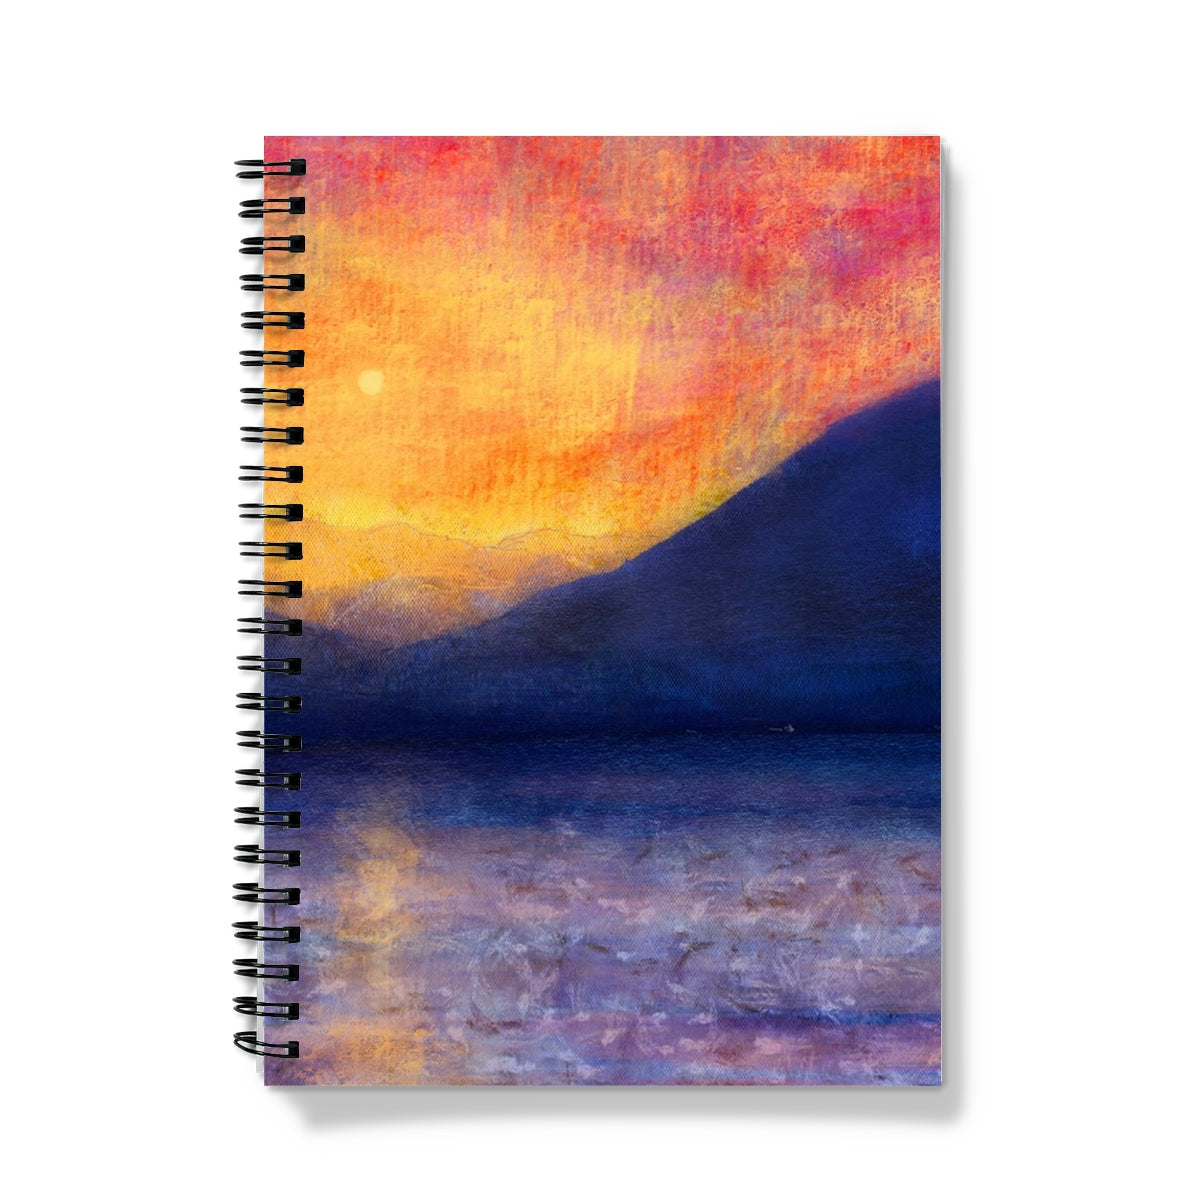 Sunset Approaching Mull Art Gifts Notebook-Journals & Notebooks-Hebridean Islands Art Gallery-A4-Lined-Paintings, Prints, Homeware, Art Gifts From Scotland By Scottish Artist Kevin Hunter